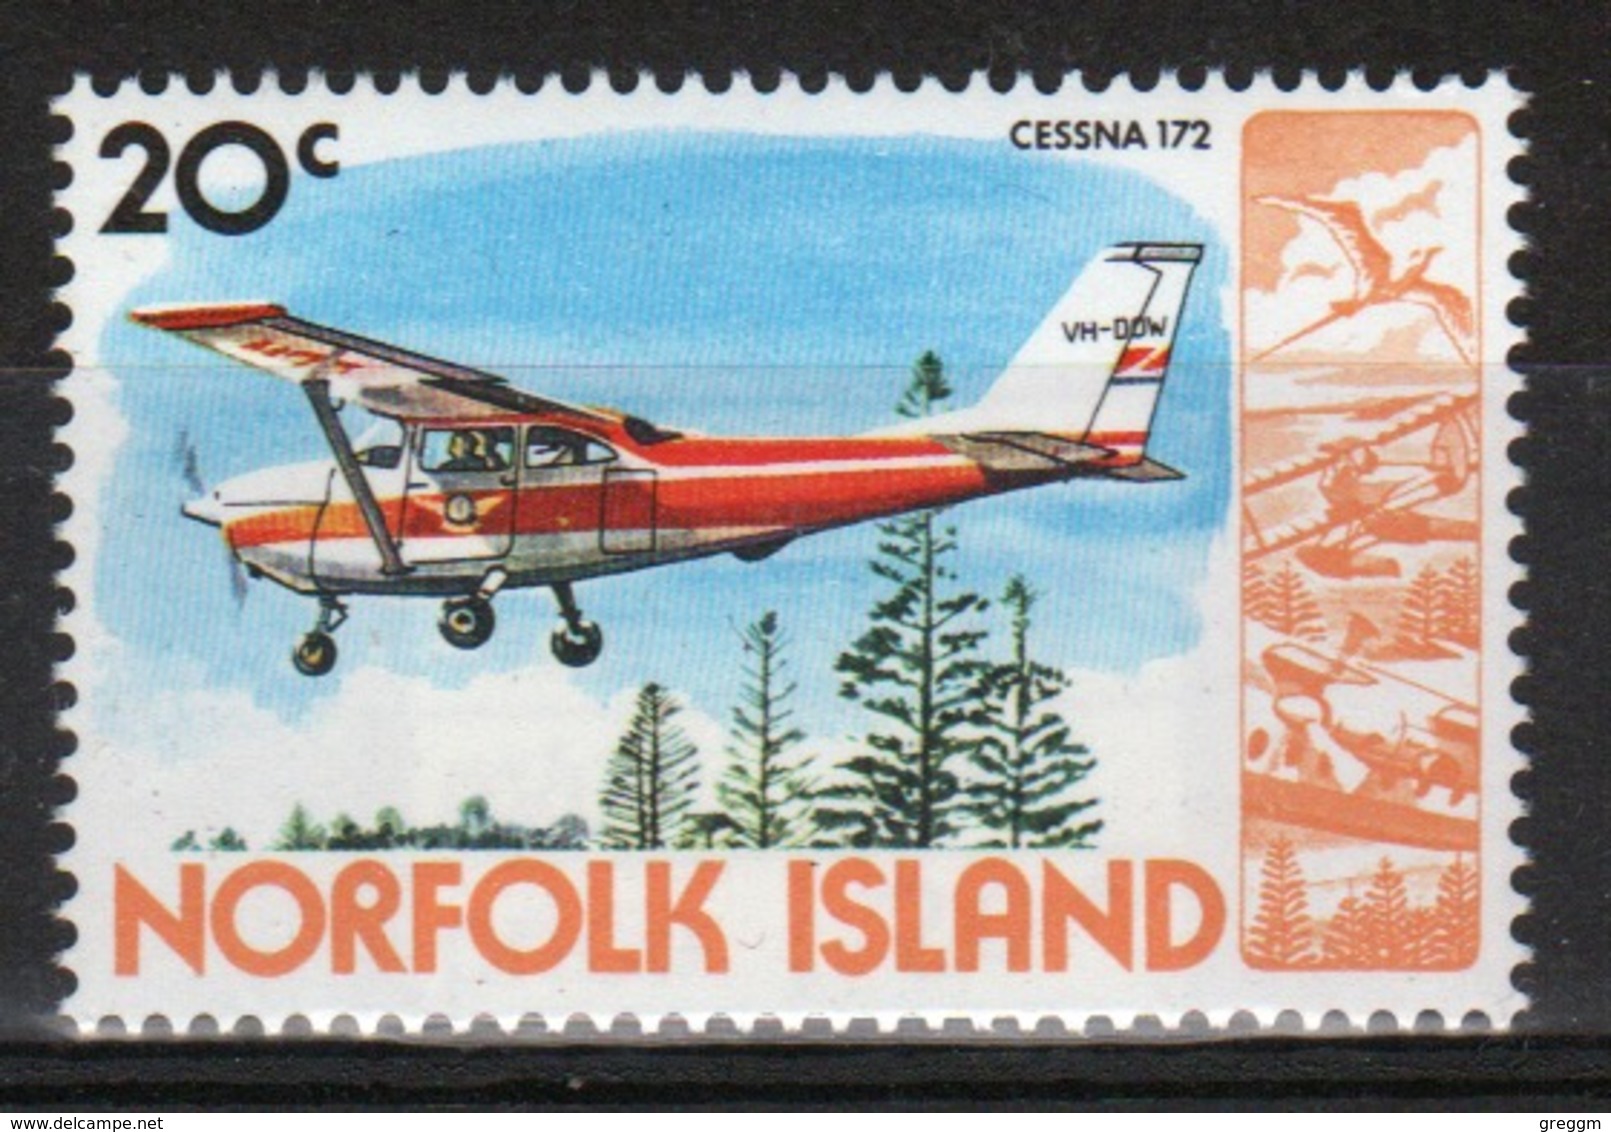 Norfolk Island Single 20c Definitive Stamp From The 1980 Aircraft Series. - Norfolk Island